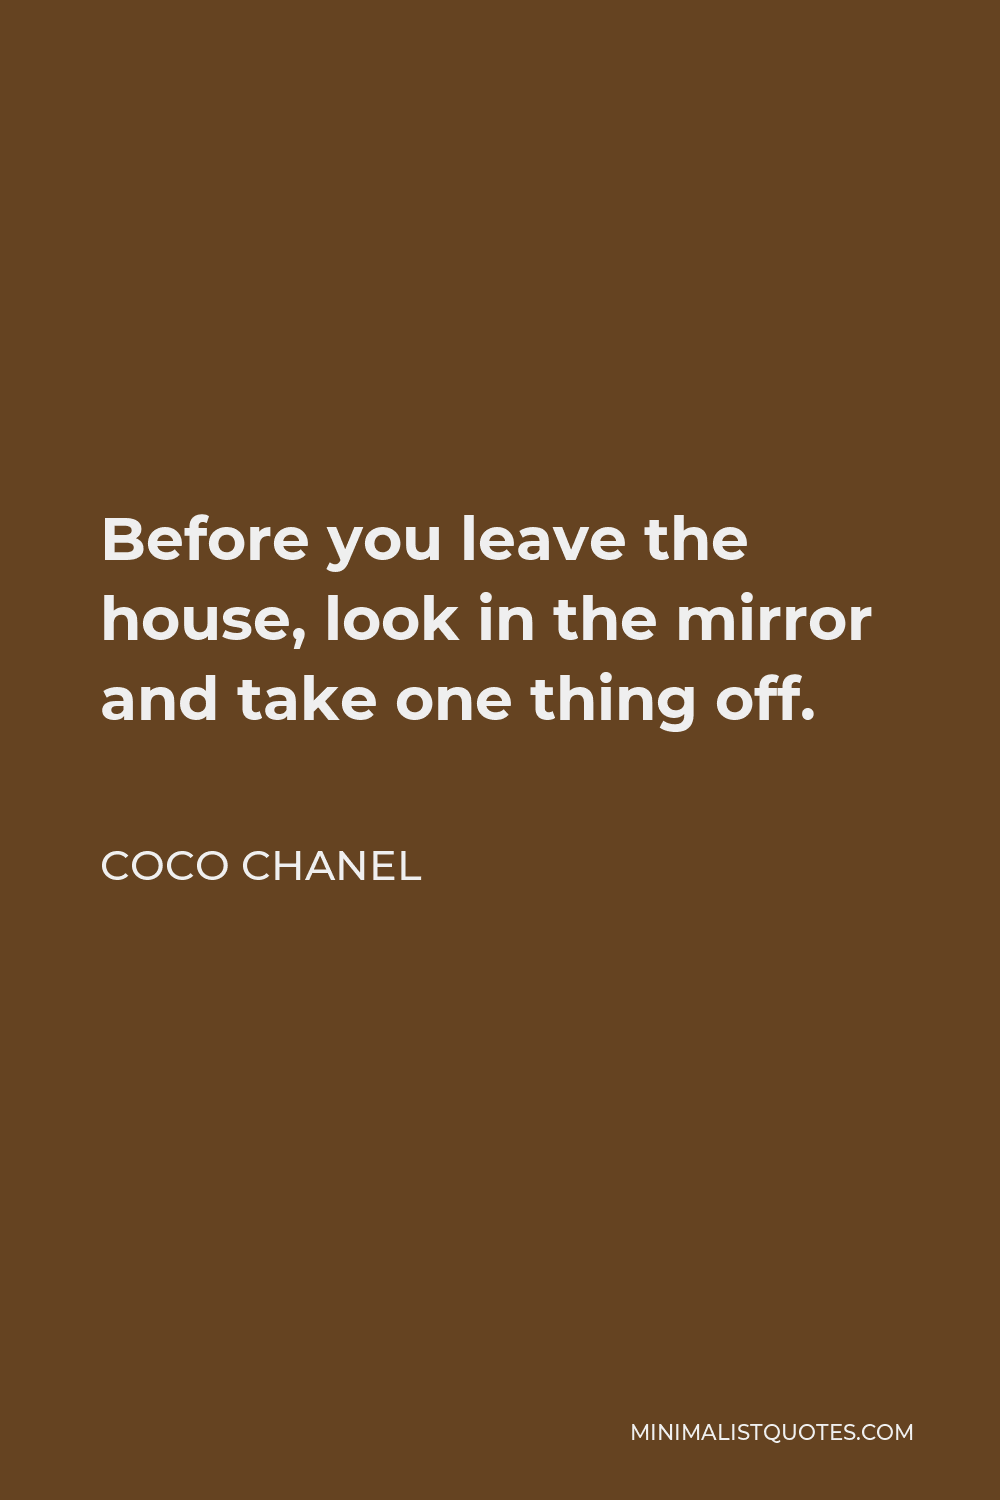 Coco Chanel Quote - Before you leave the house, look in the mirror and take one thing off.